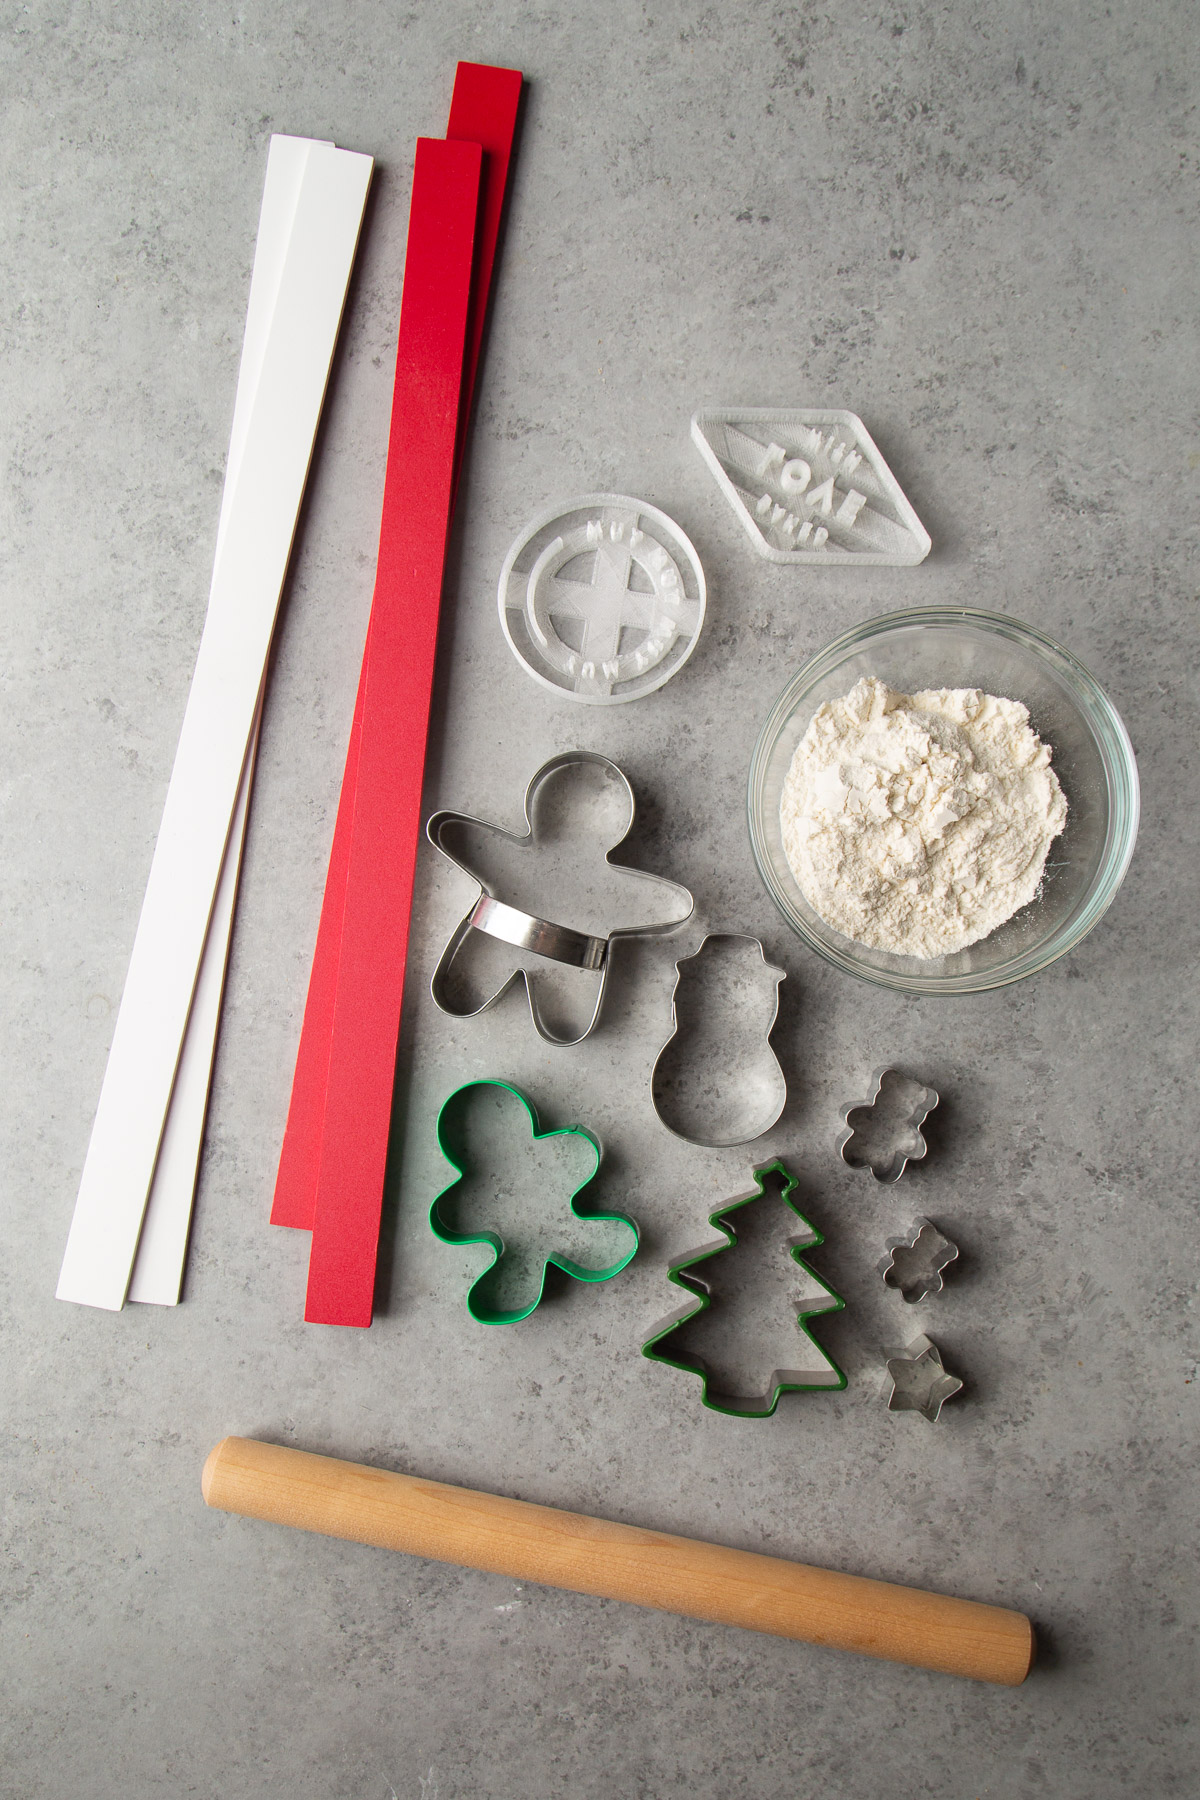 key tools for rolled out cookie dough include rolling pin, cookie stamps, and dough levels.